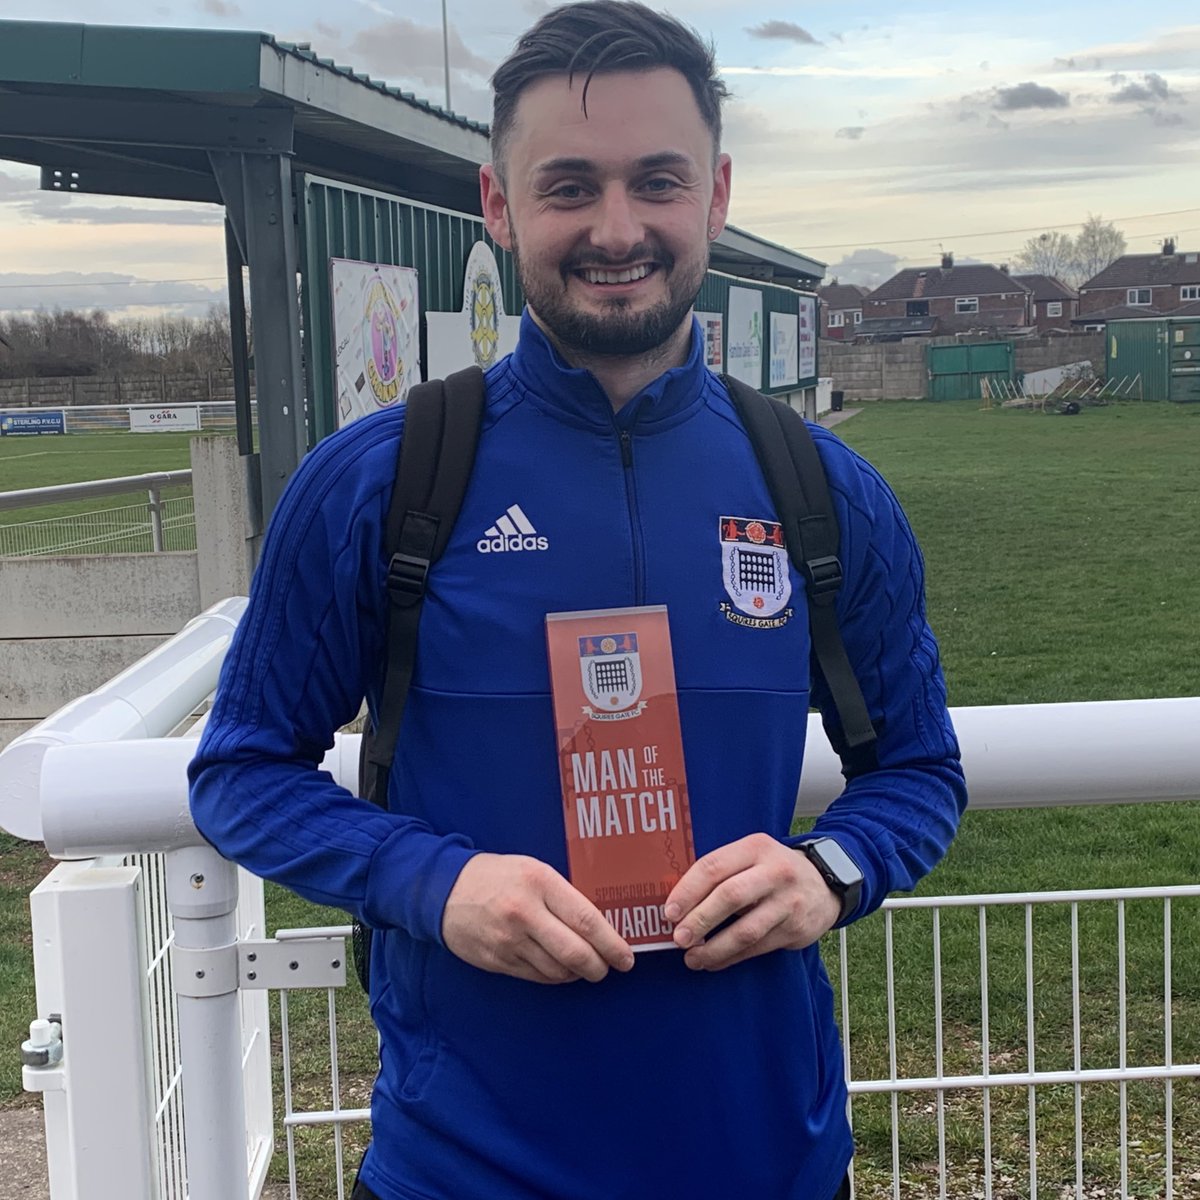 🏆Today’s Man Of The Match, sponsored by @Awards_FC_ is… 👏𝗥𝗬𝗔𝗡 𝗥𝗜𝗟𝗘𝗬 - An excellent performance from the flying winger capped off with a well taken goal, keep it up Ryan! 🔷#WeAreGate